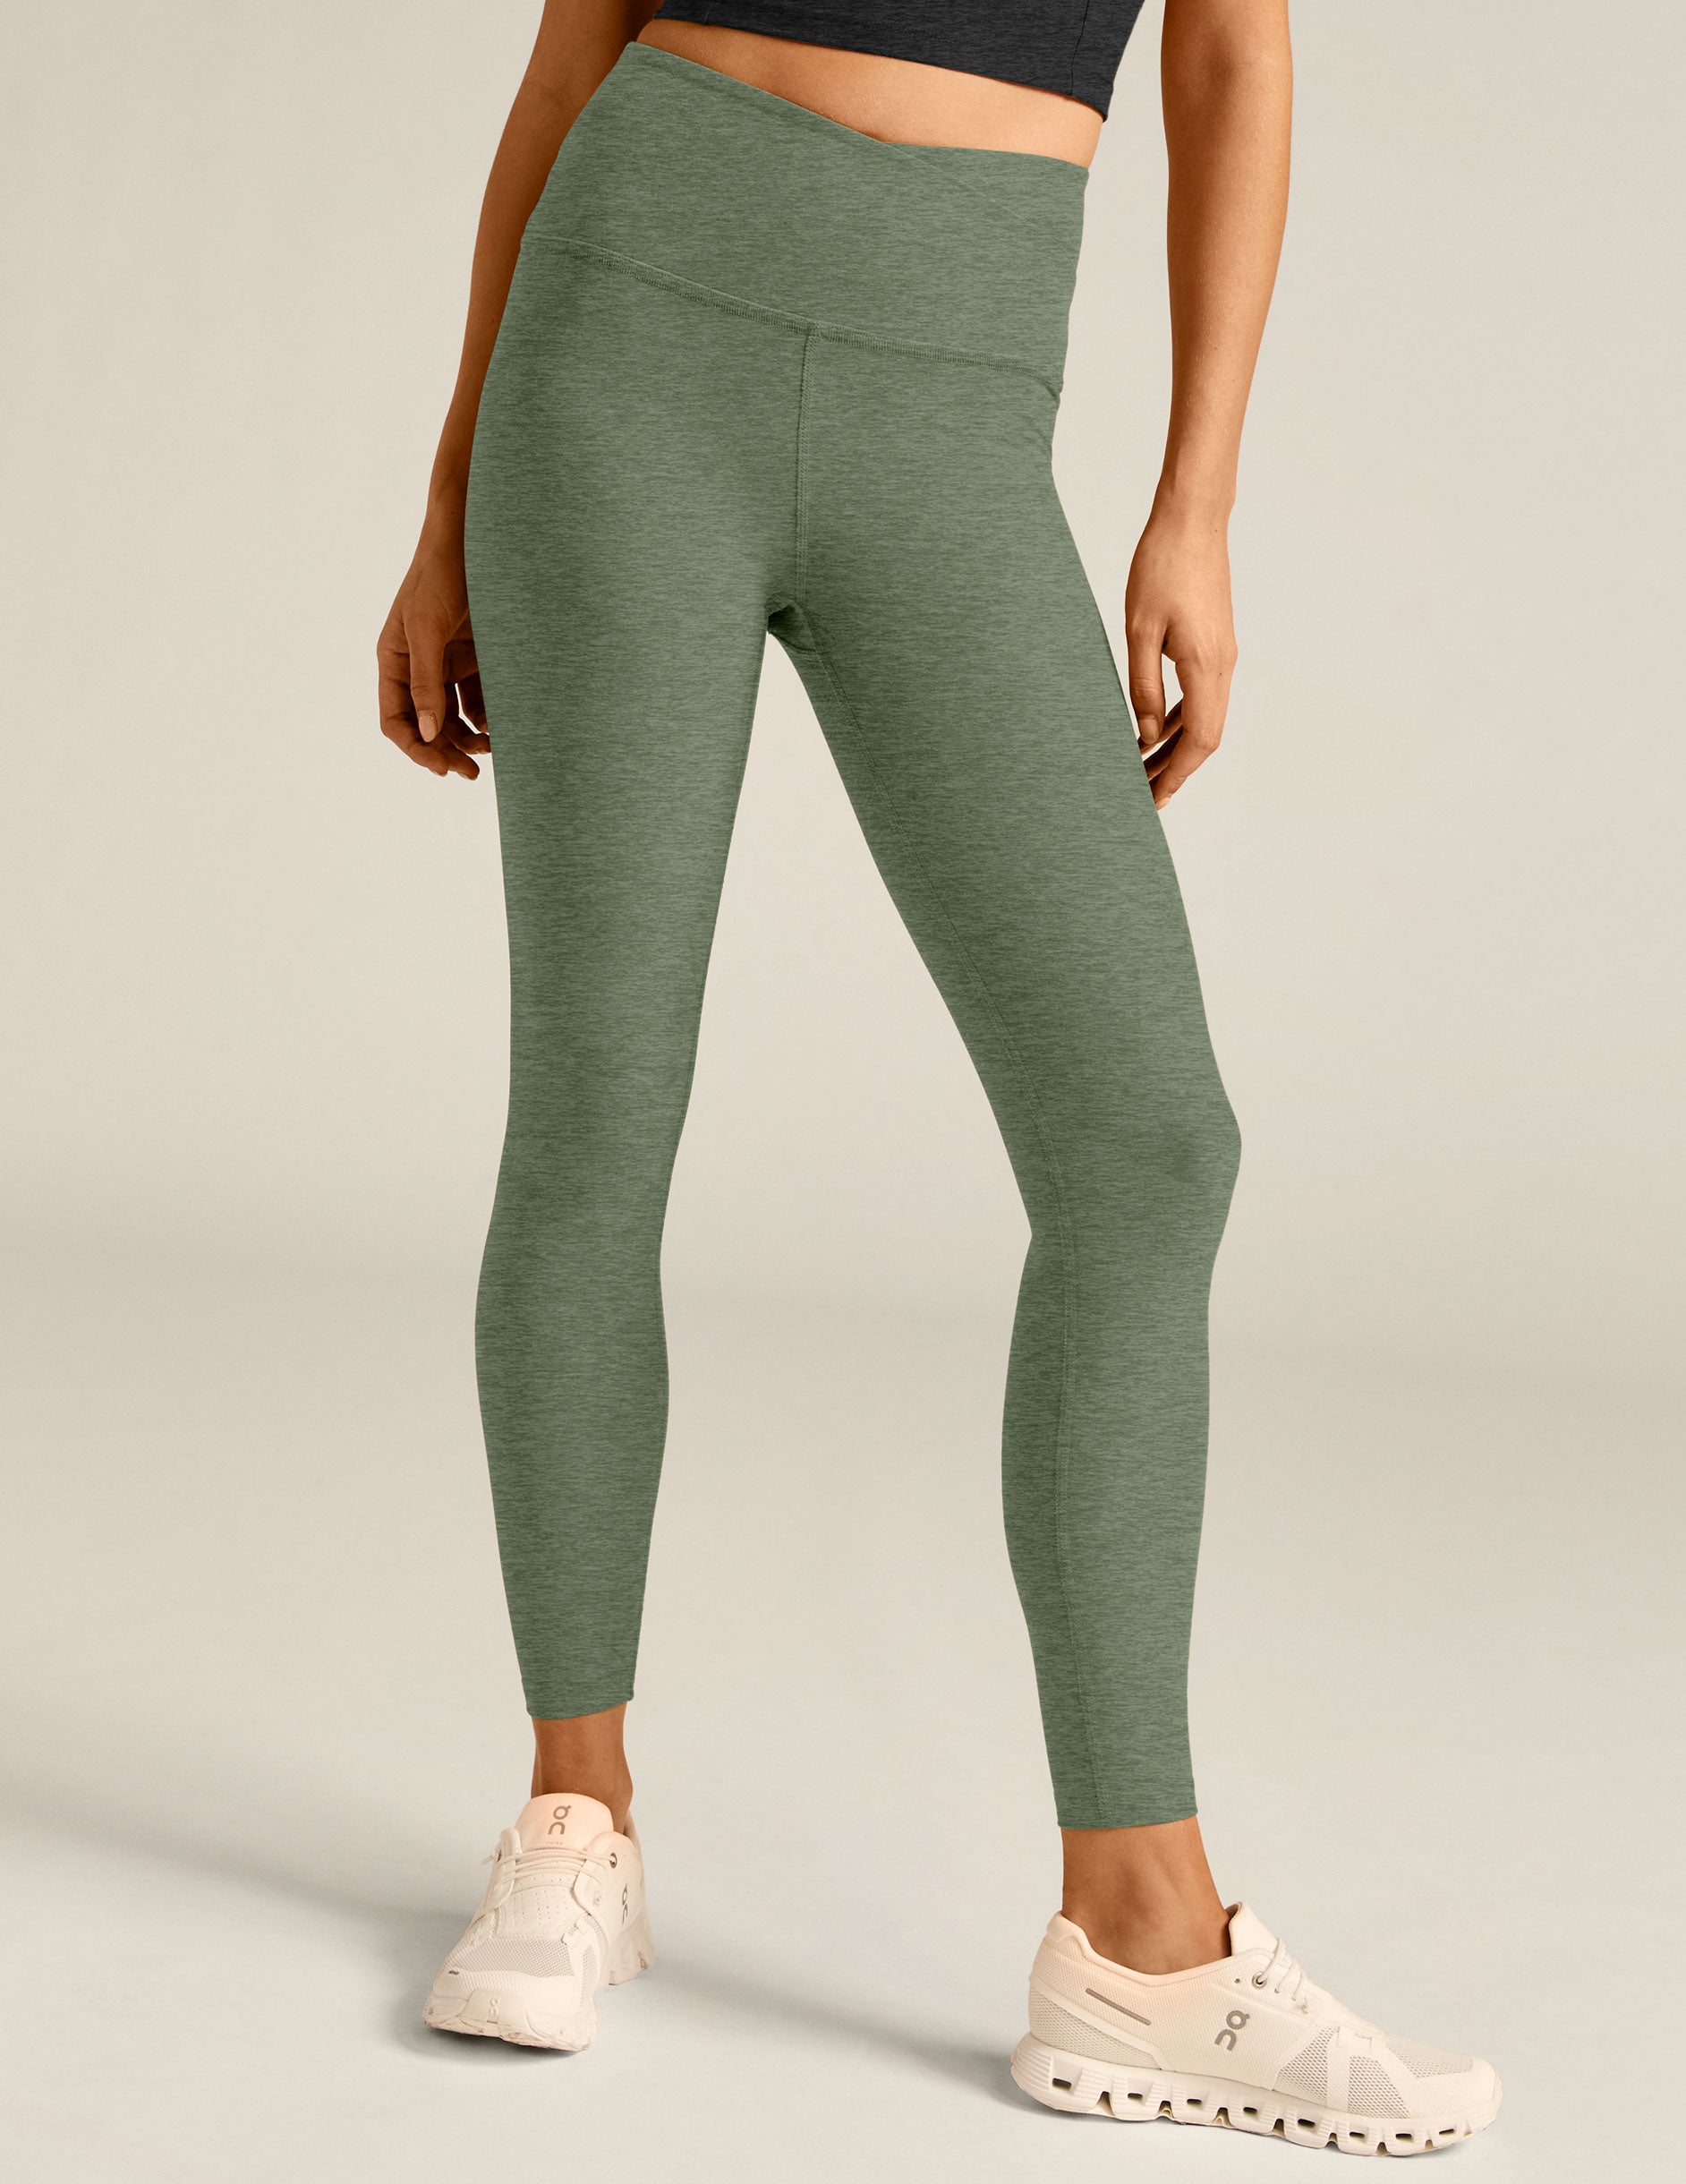 green high-waisted midi leggings with a crossover detail on the front waistband. 